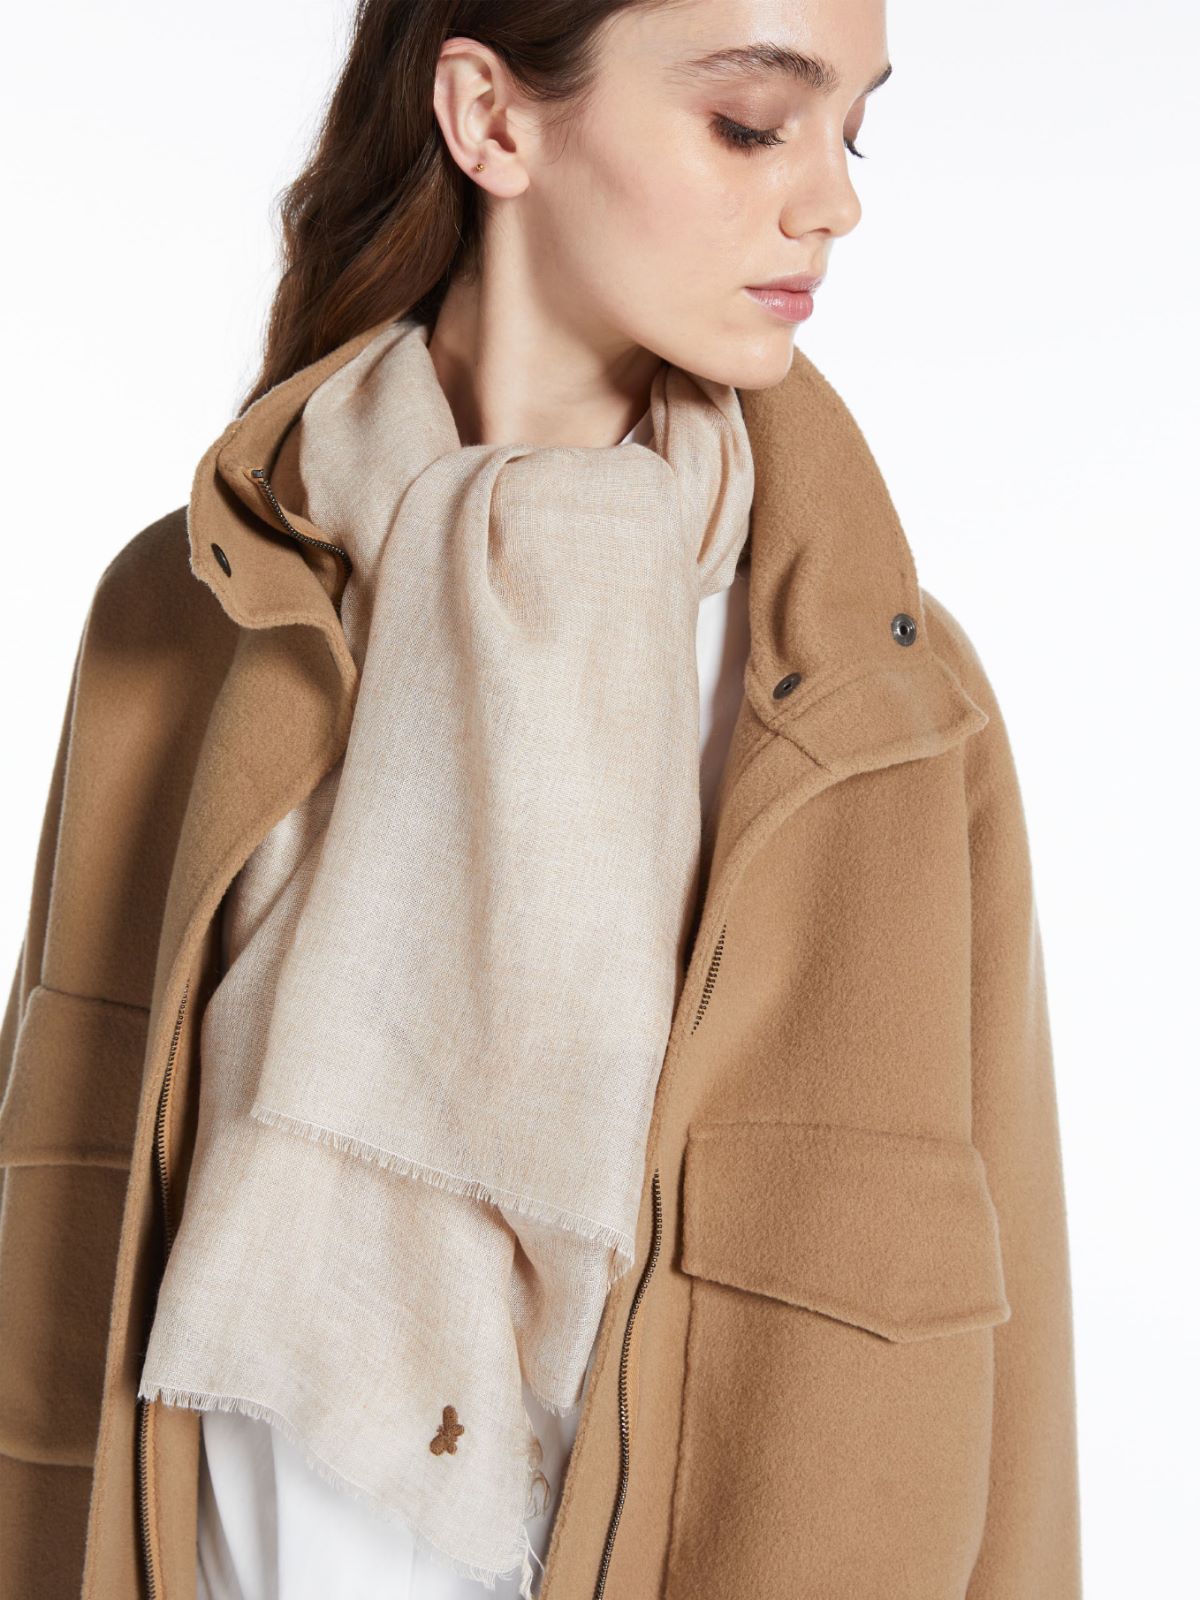 Viscose and cashmere stole - CAMEL - Weekend Max Mara - 6